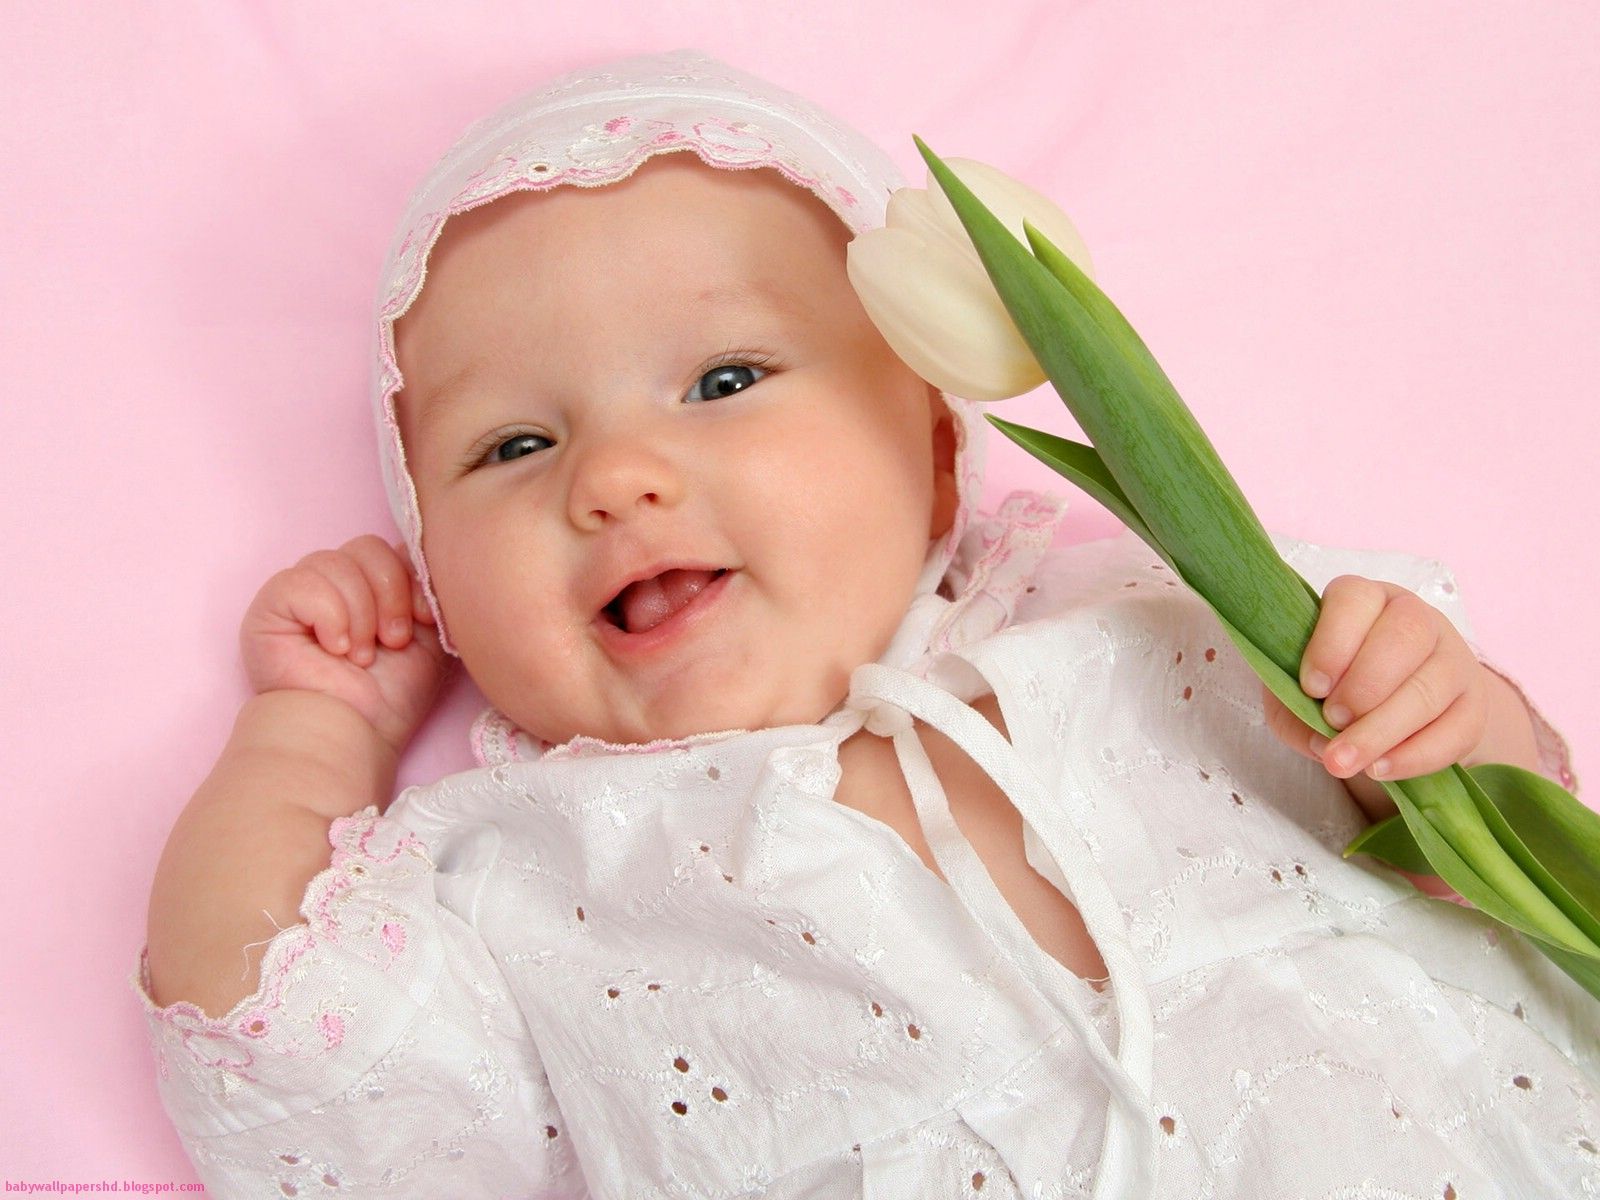 Cute baby girl wallpapers for facebook2